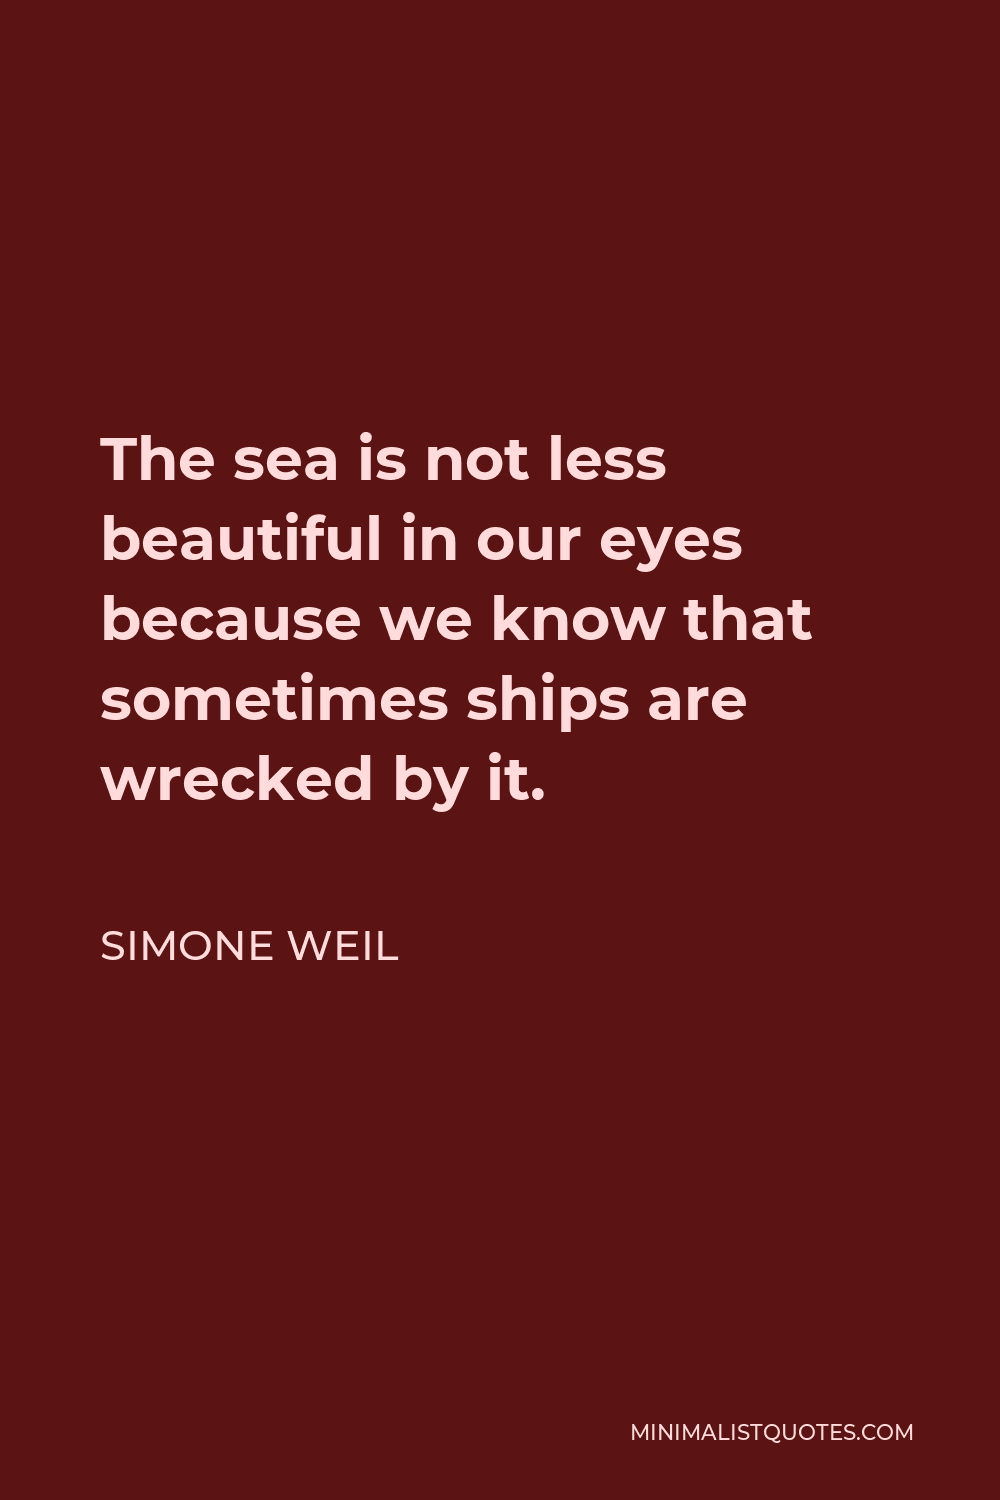 Simone Weil Quote - The sea is not less beautiful in our eyes because we know that sometimes ships are wrecked by it.